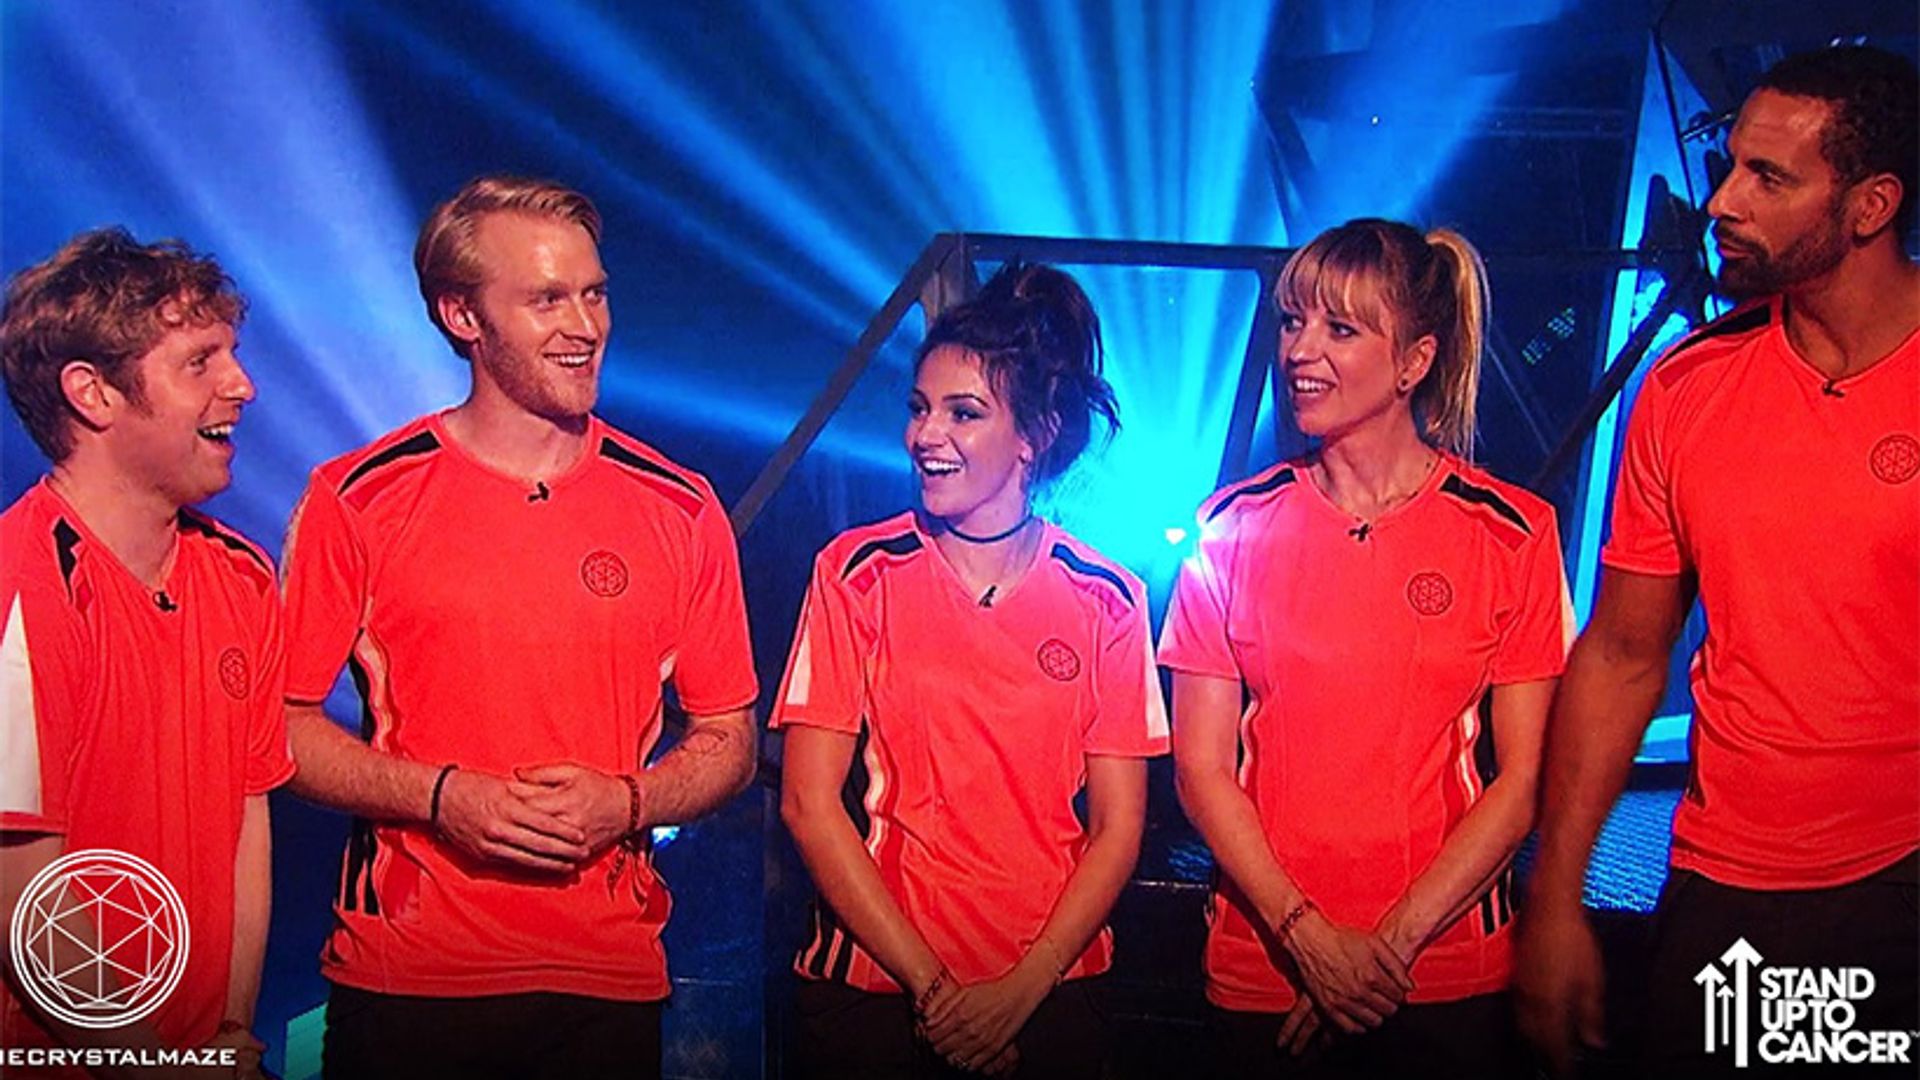 Michelle Keegan steals the show with 'stunning' Crystal Maze appearance